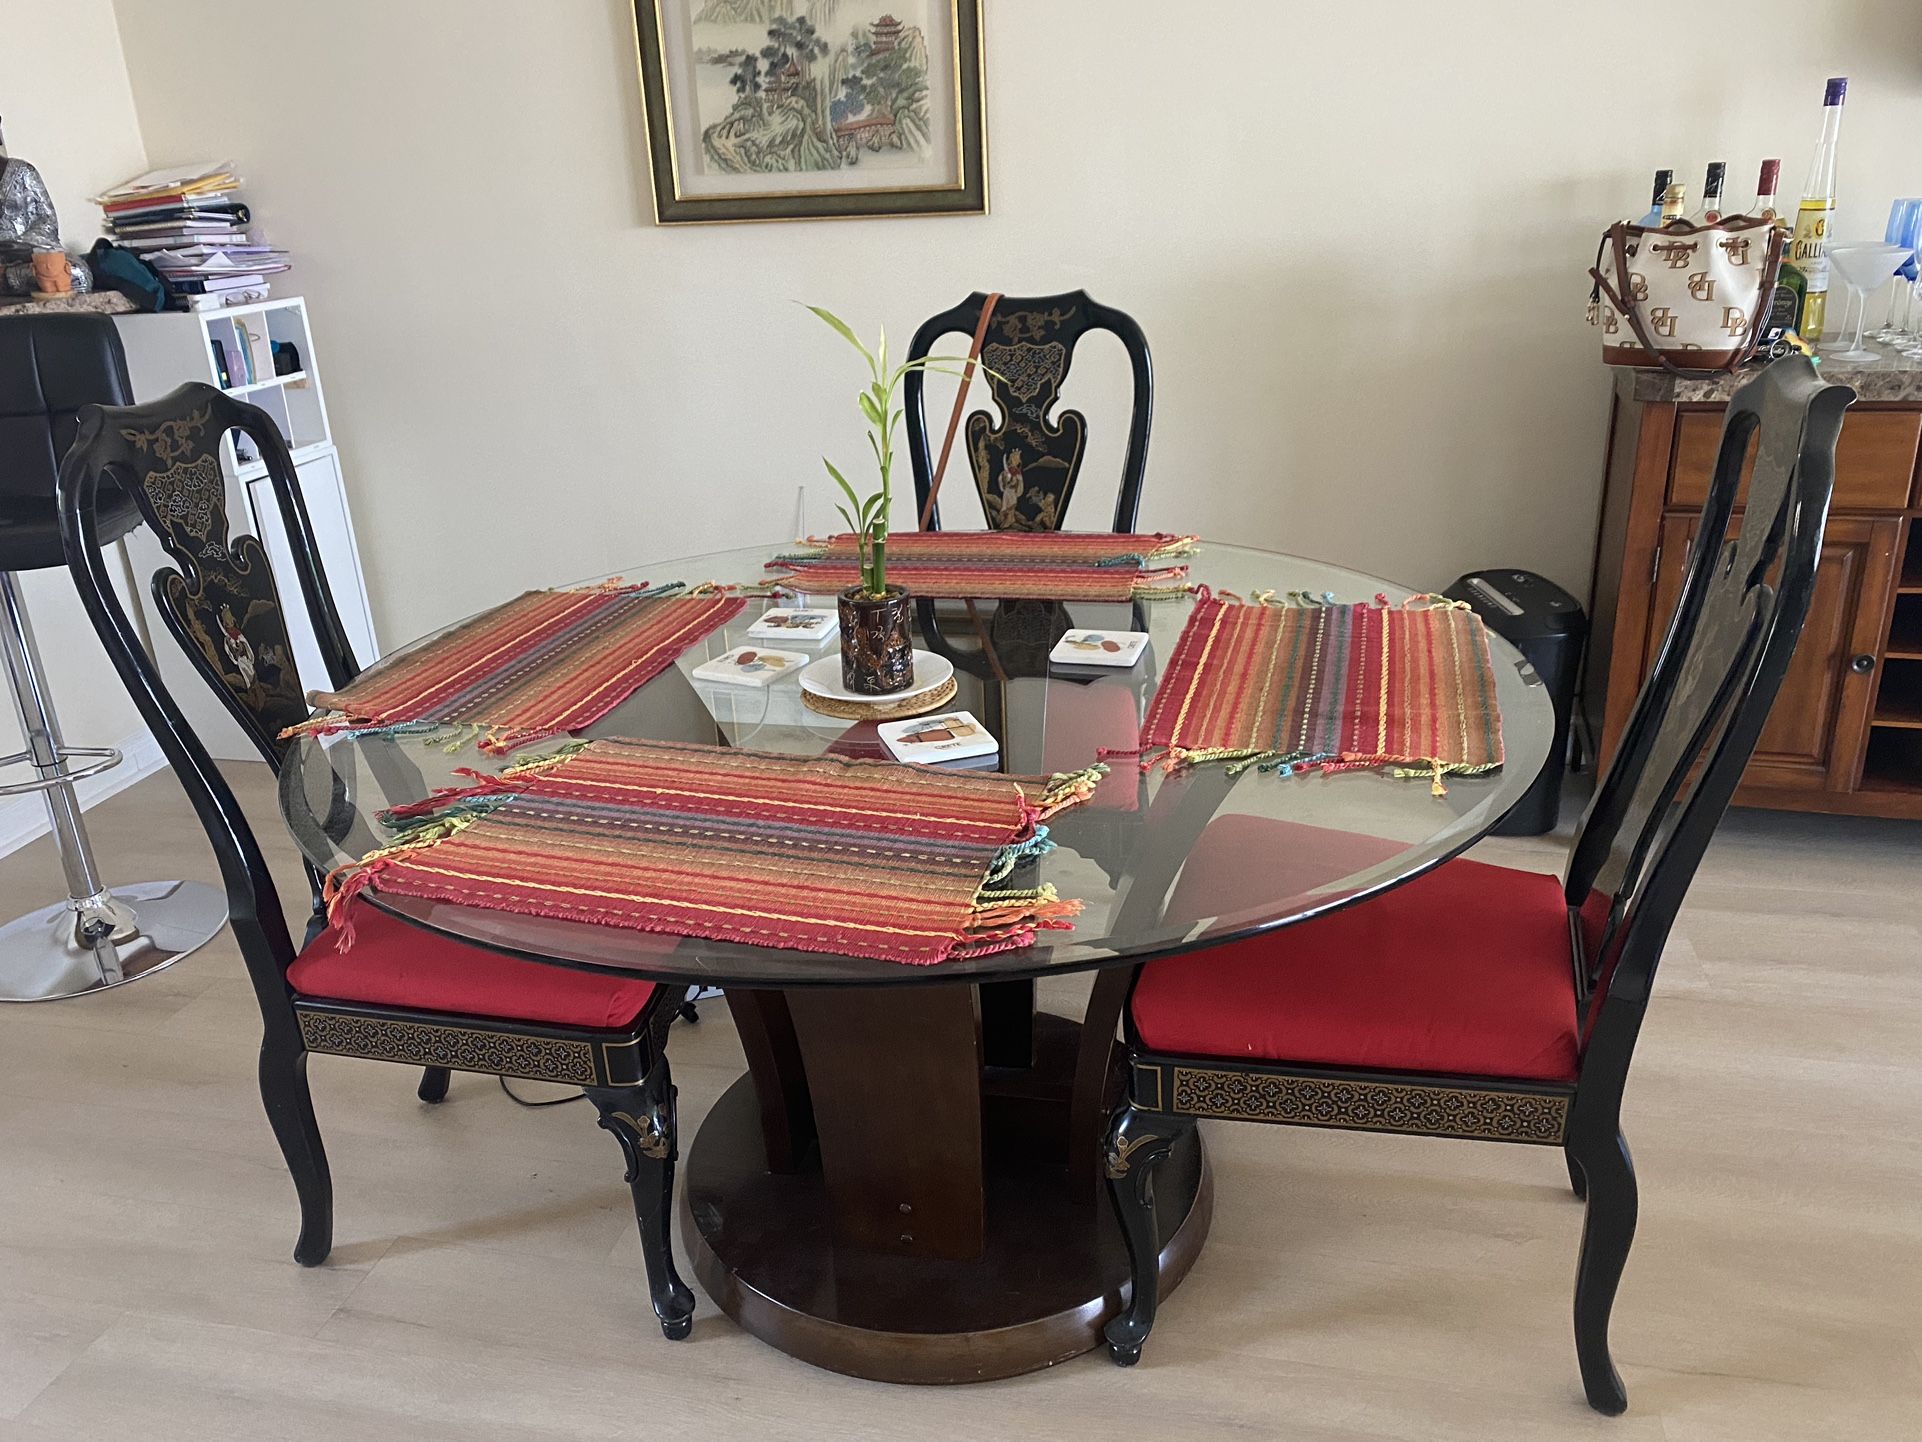 Dinnet set with 4 chairs